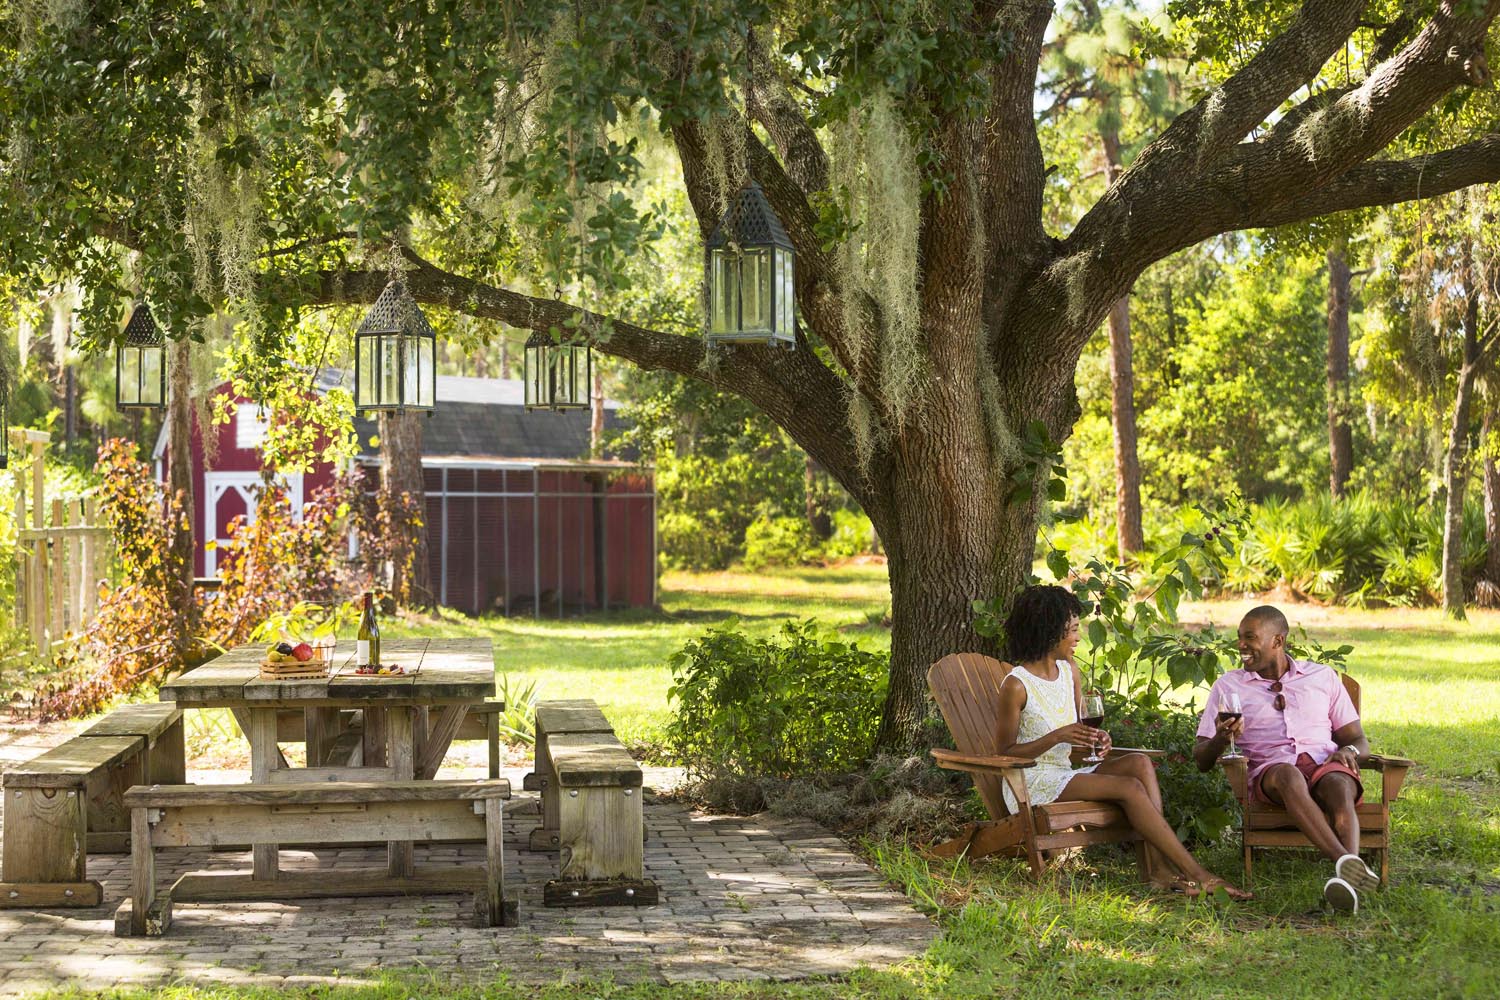 Grande Lakes Orlando's Whisper Creek Fables series of farm-to-table experiences includes a Farm to Fare option for couples, featuring a romantic dinner for two.